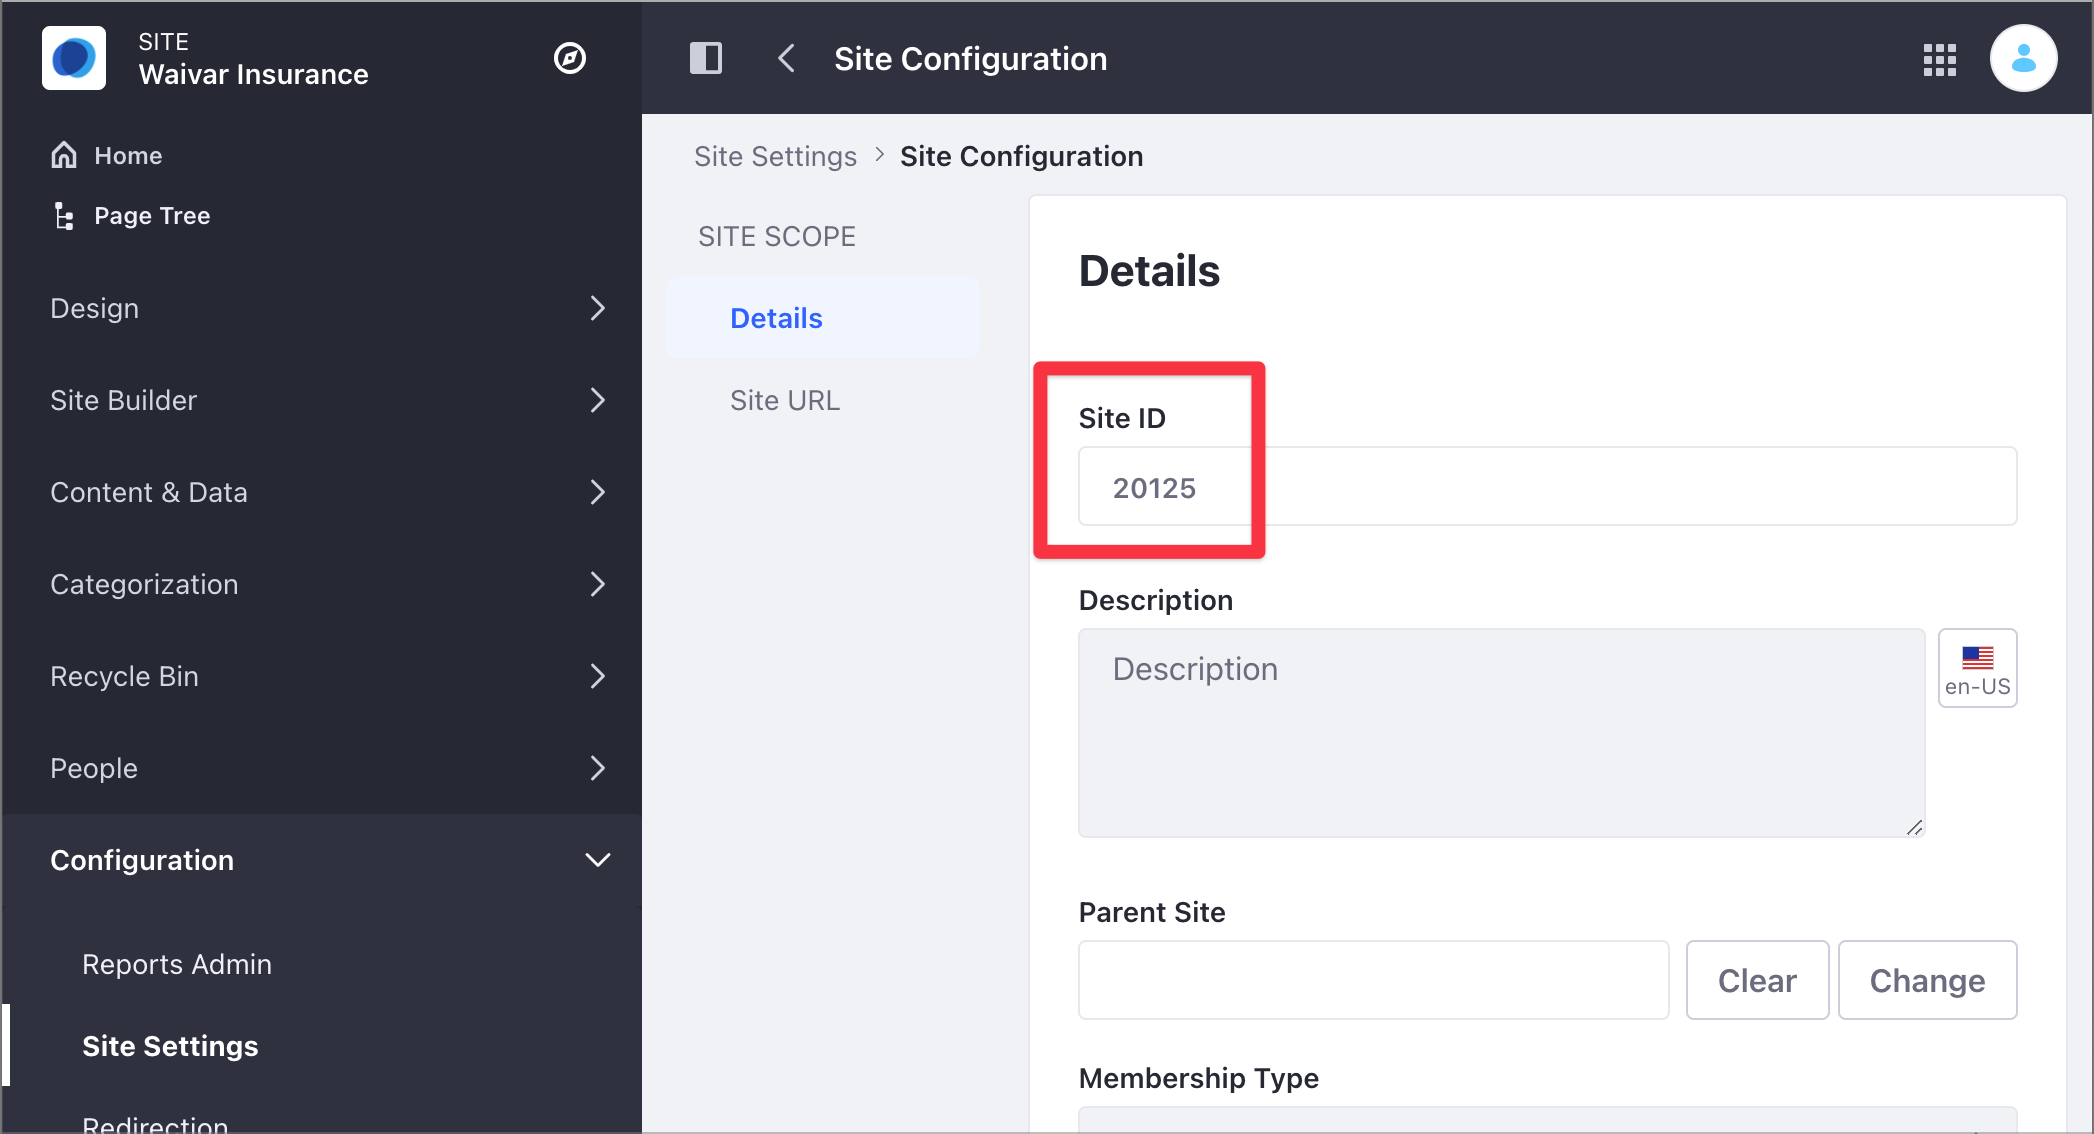 Find the Site ID under the Site Settings and Site Configuration option.